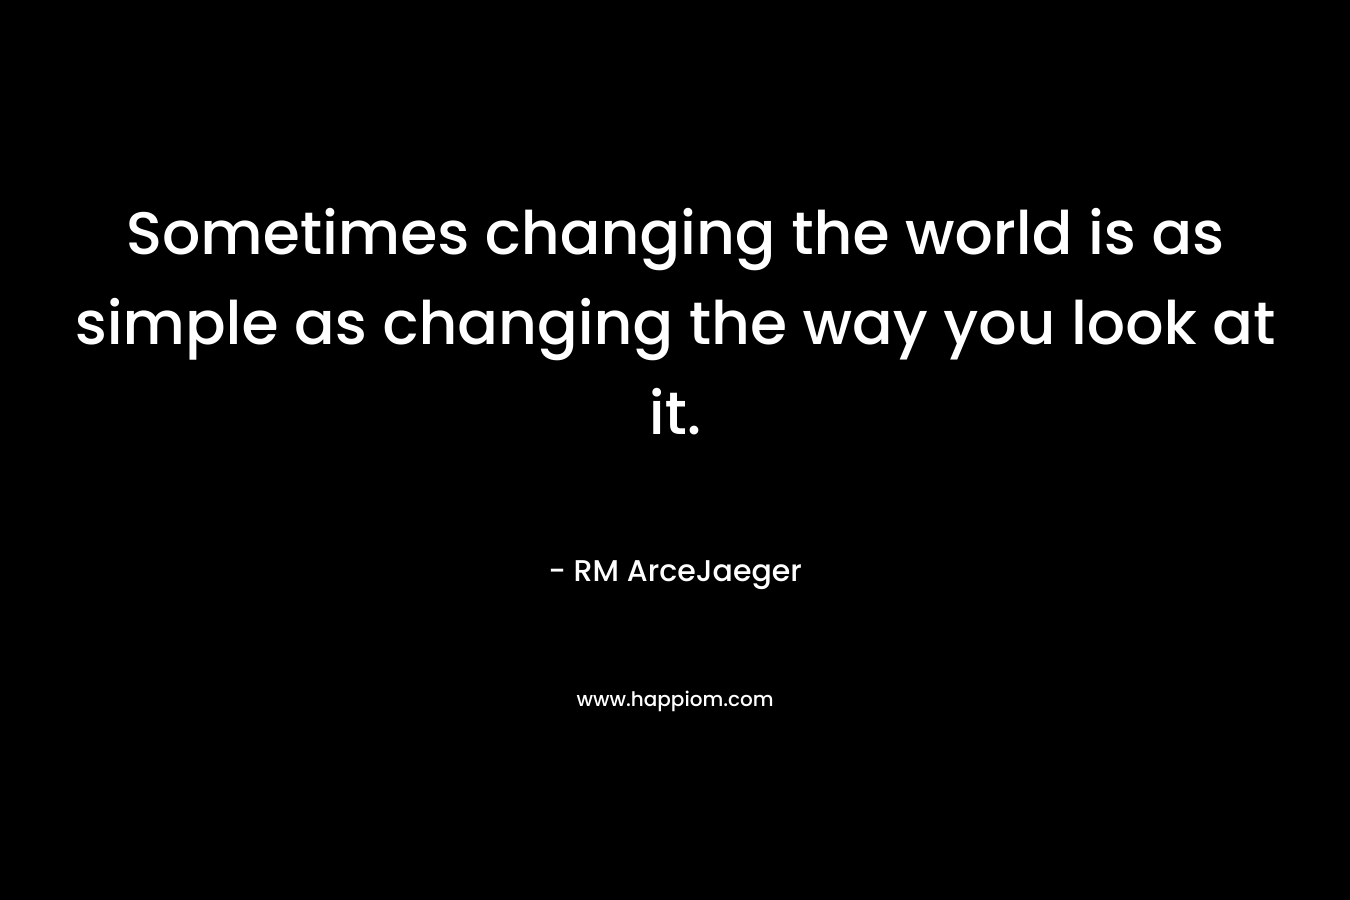 Sometimes changing the world is as simple as changing the way you look at it. – RM ArceJaeger